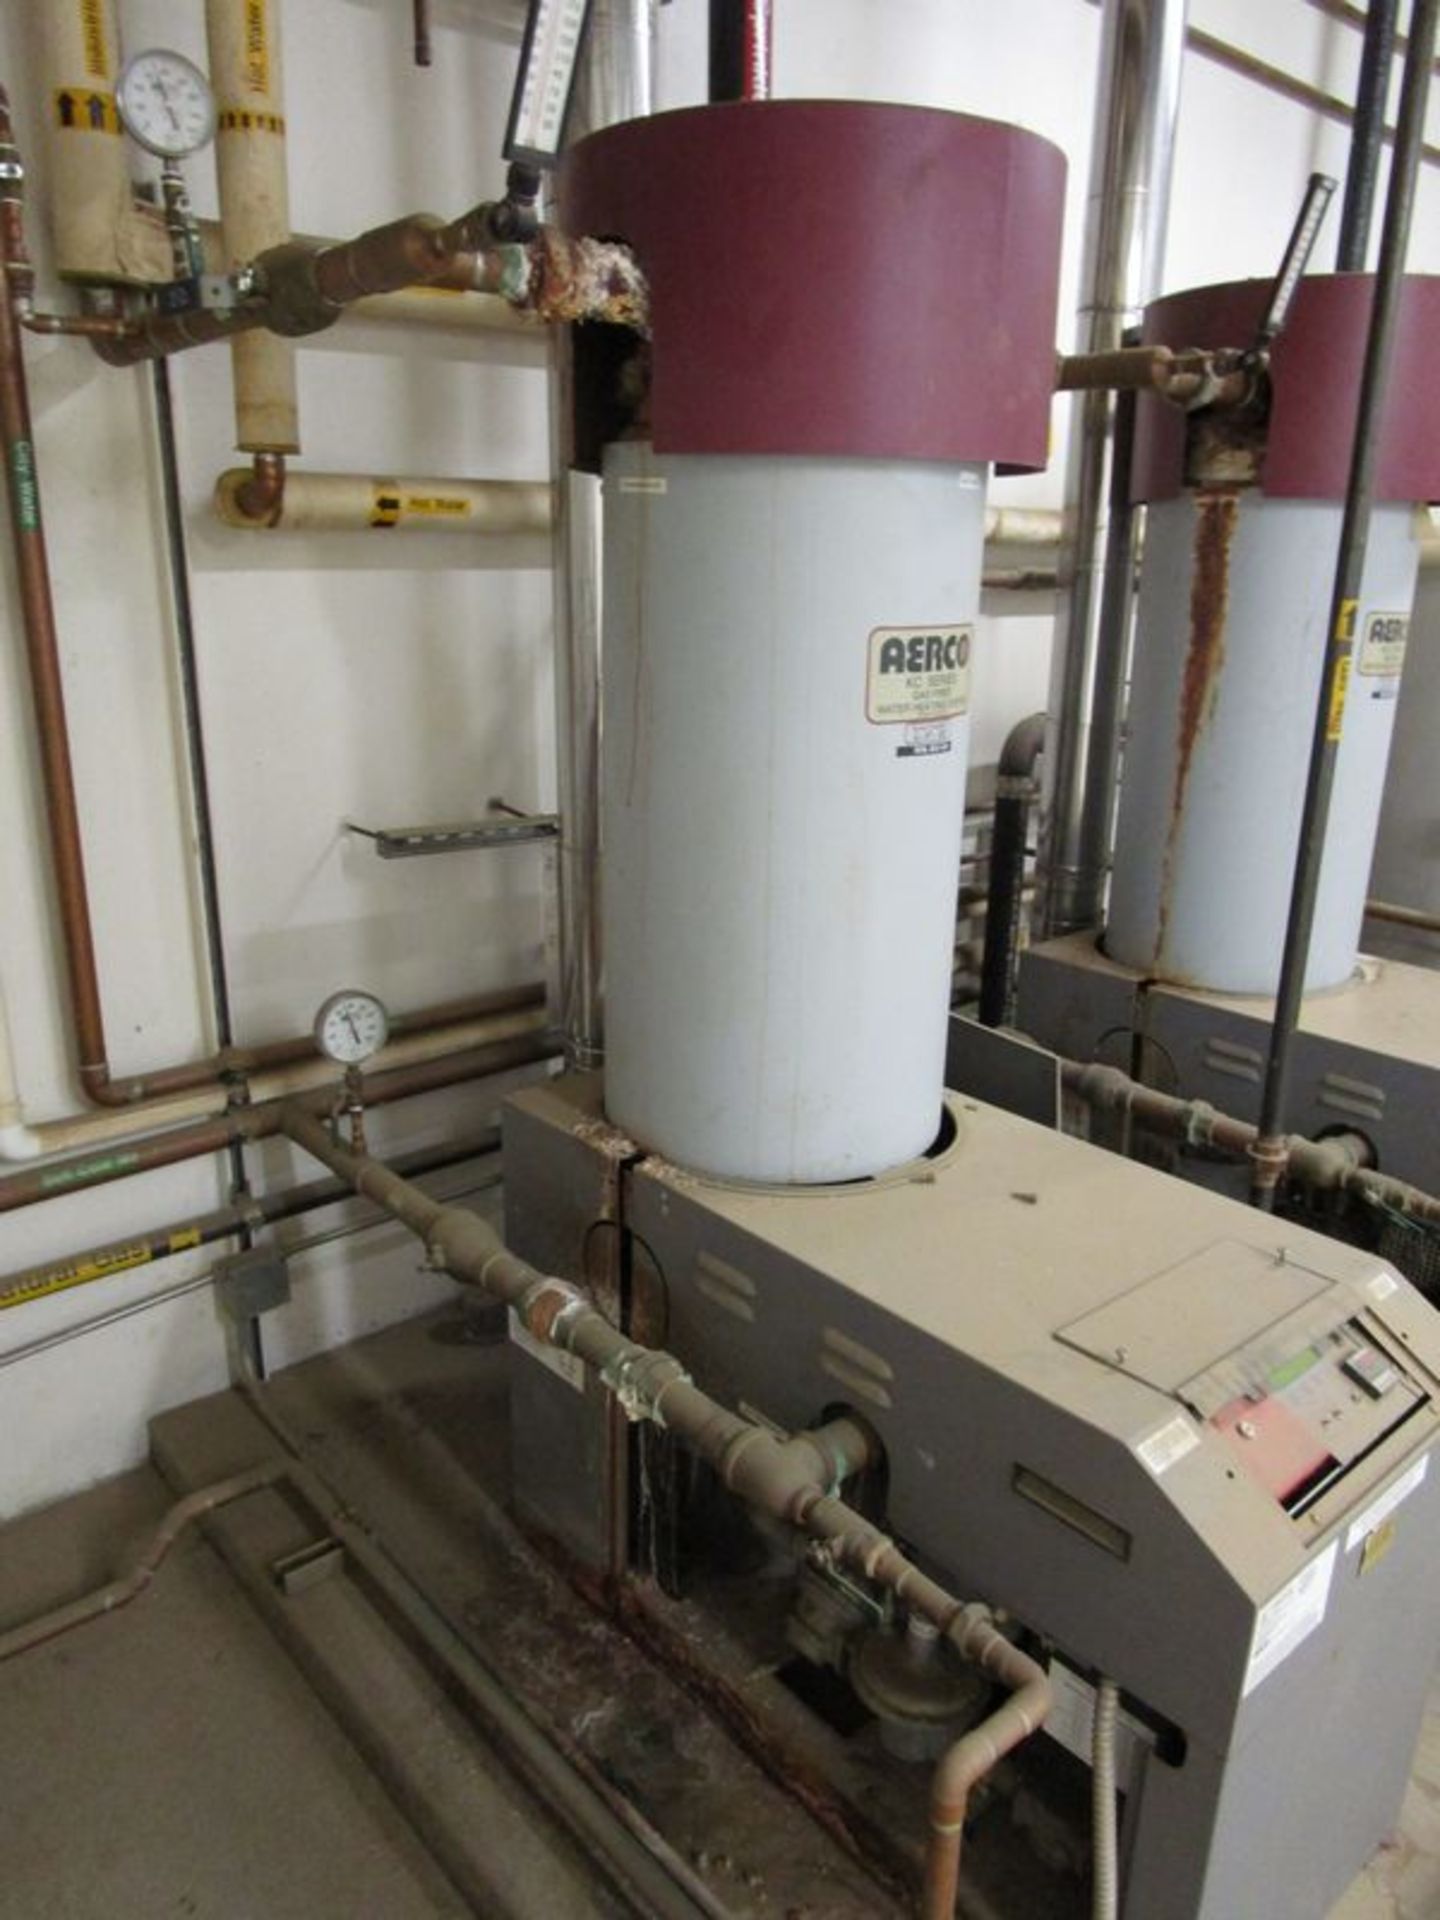 Aerco Model KC Series  Hot Water Boiler , Serial Number: G-97-032  (1997)Gas Fired Water Heater,